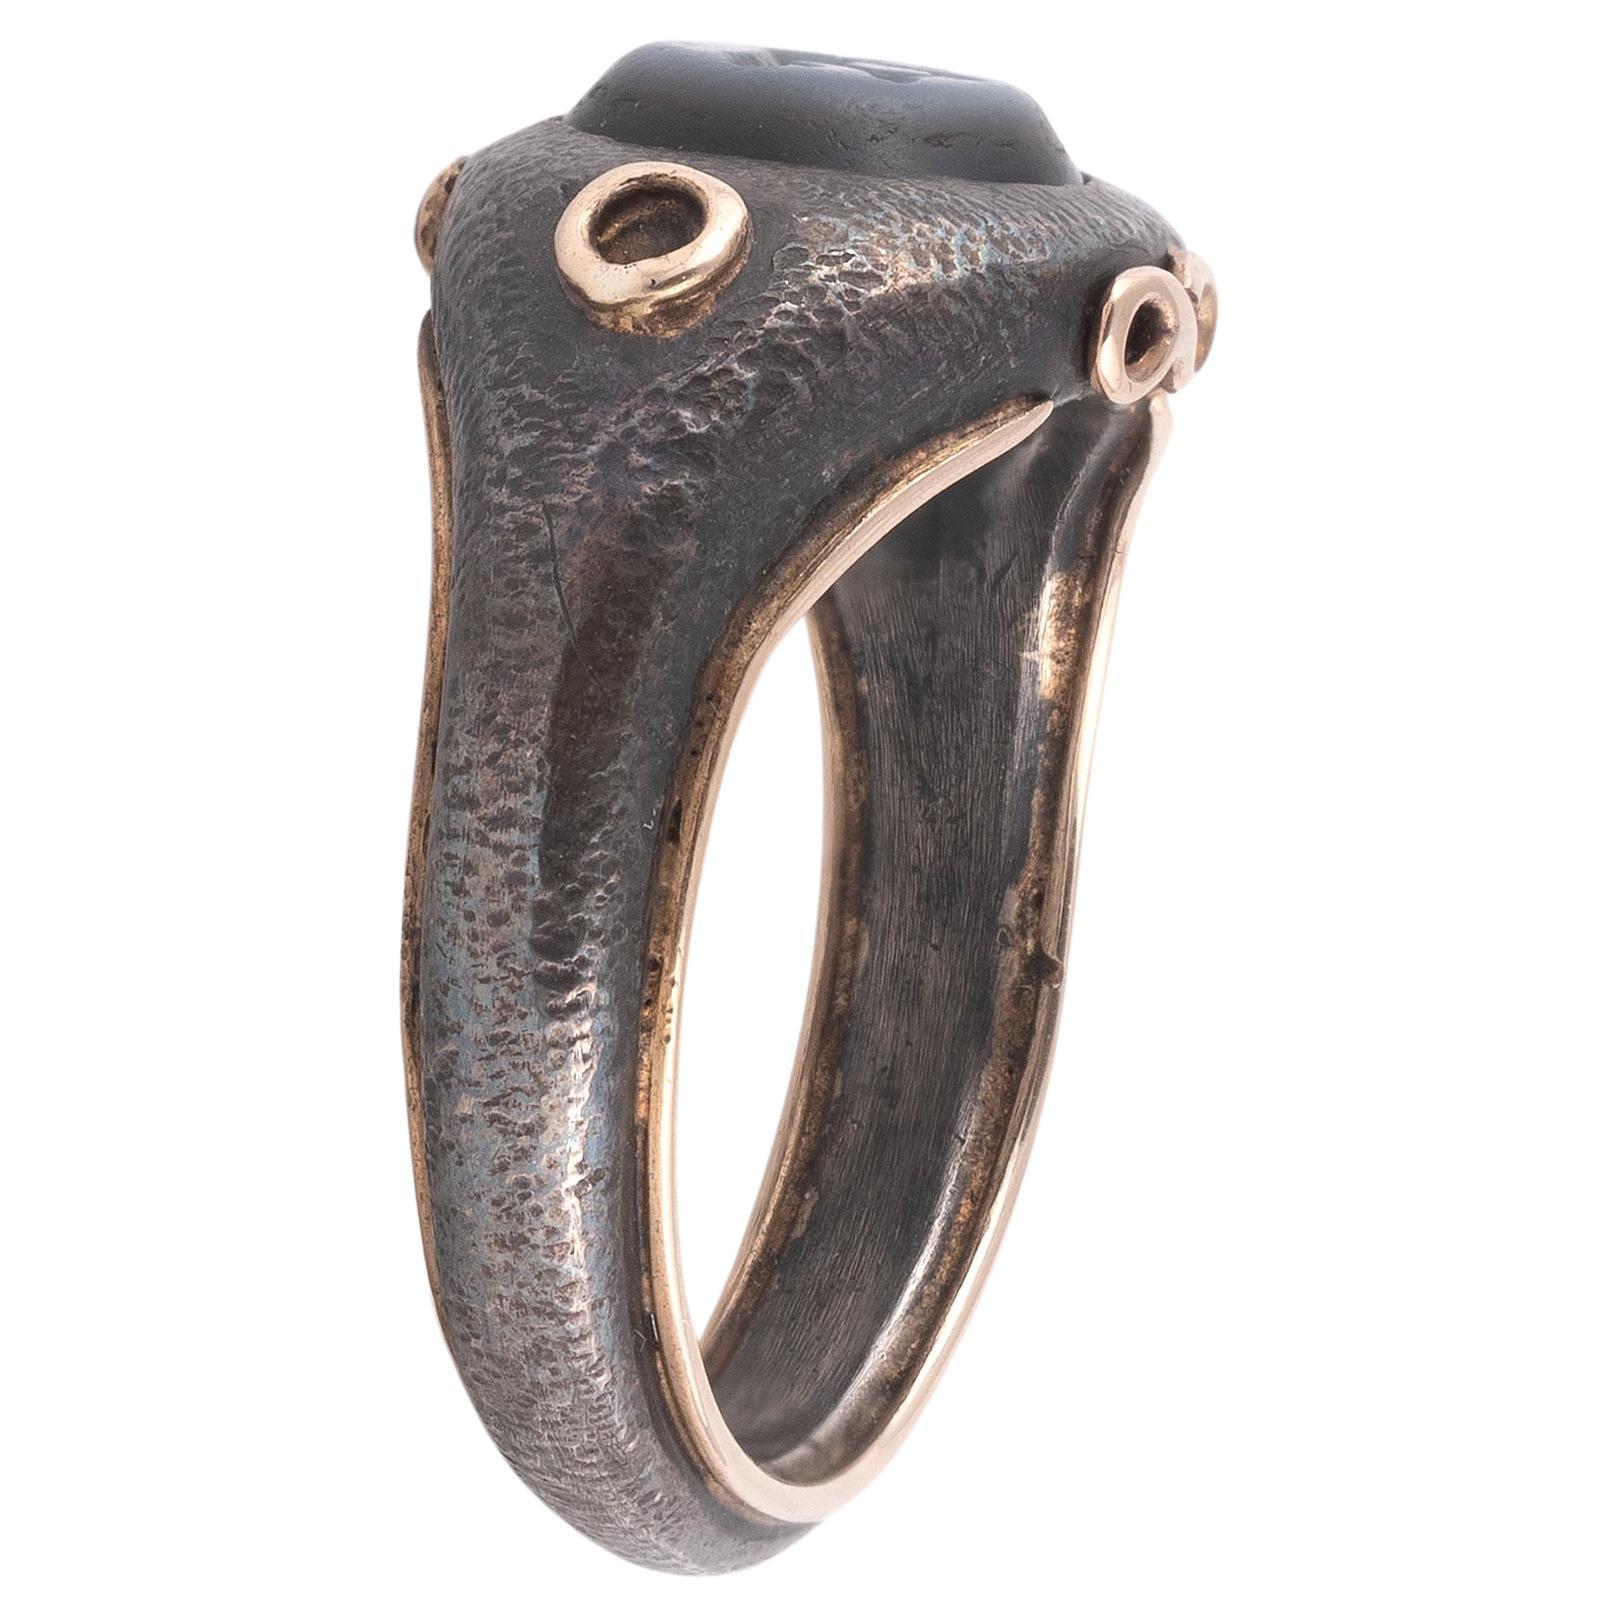 The oval stone engraved, depicting a panther, finger size 7 , the stone 7mm high, set in a modern silver and gold ring
Weight: 7.42gr.